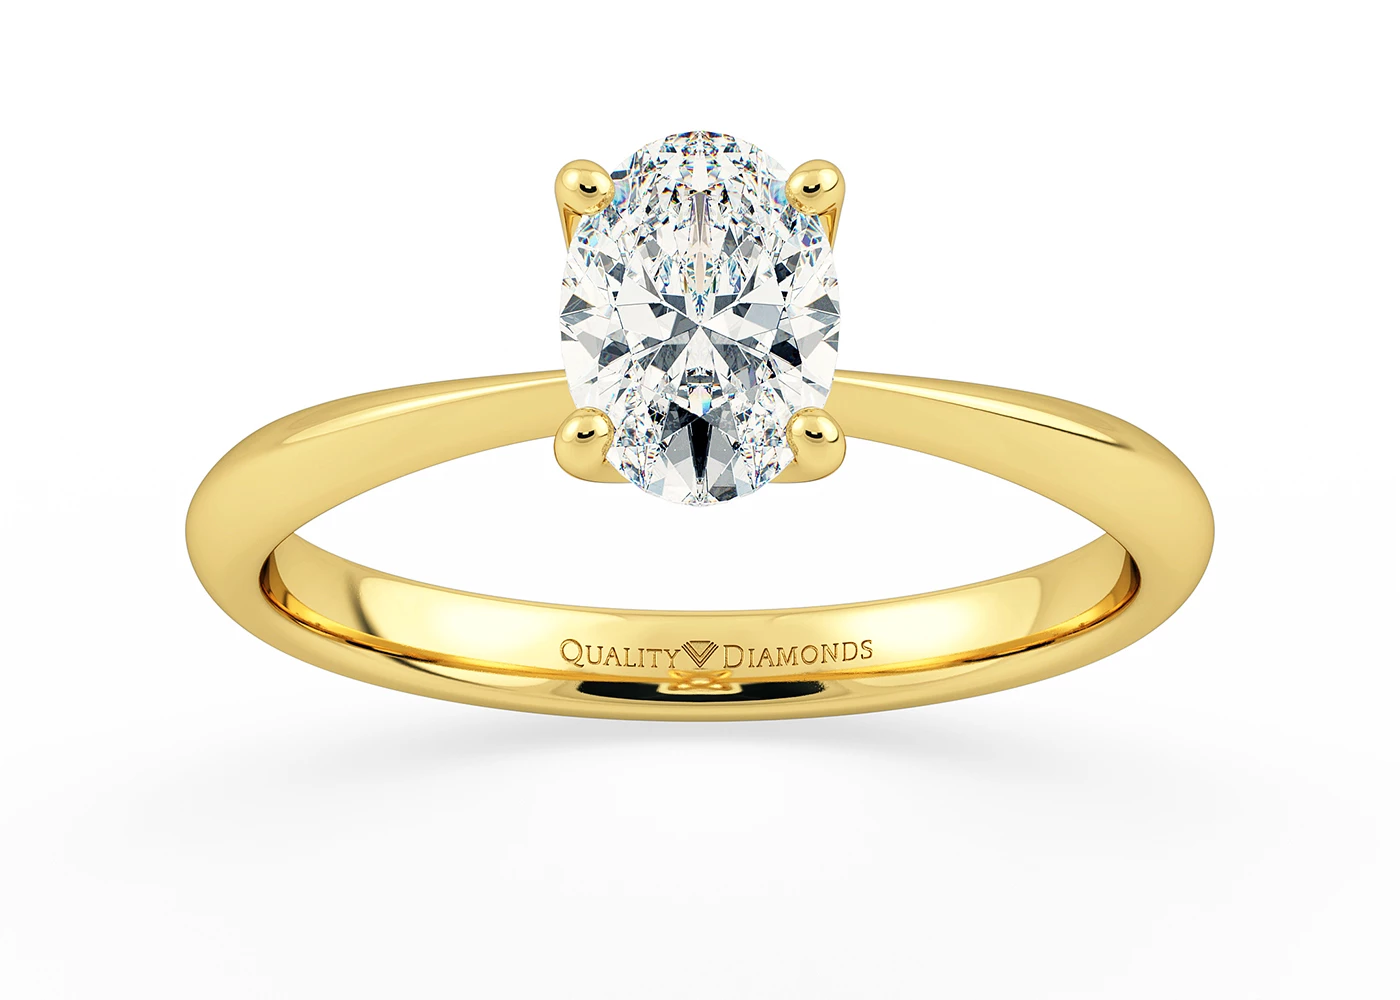 One Carat Oval Solitaire Diamond Engagement Ring in 18K Yellow Gold